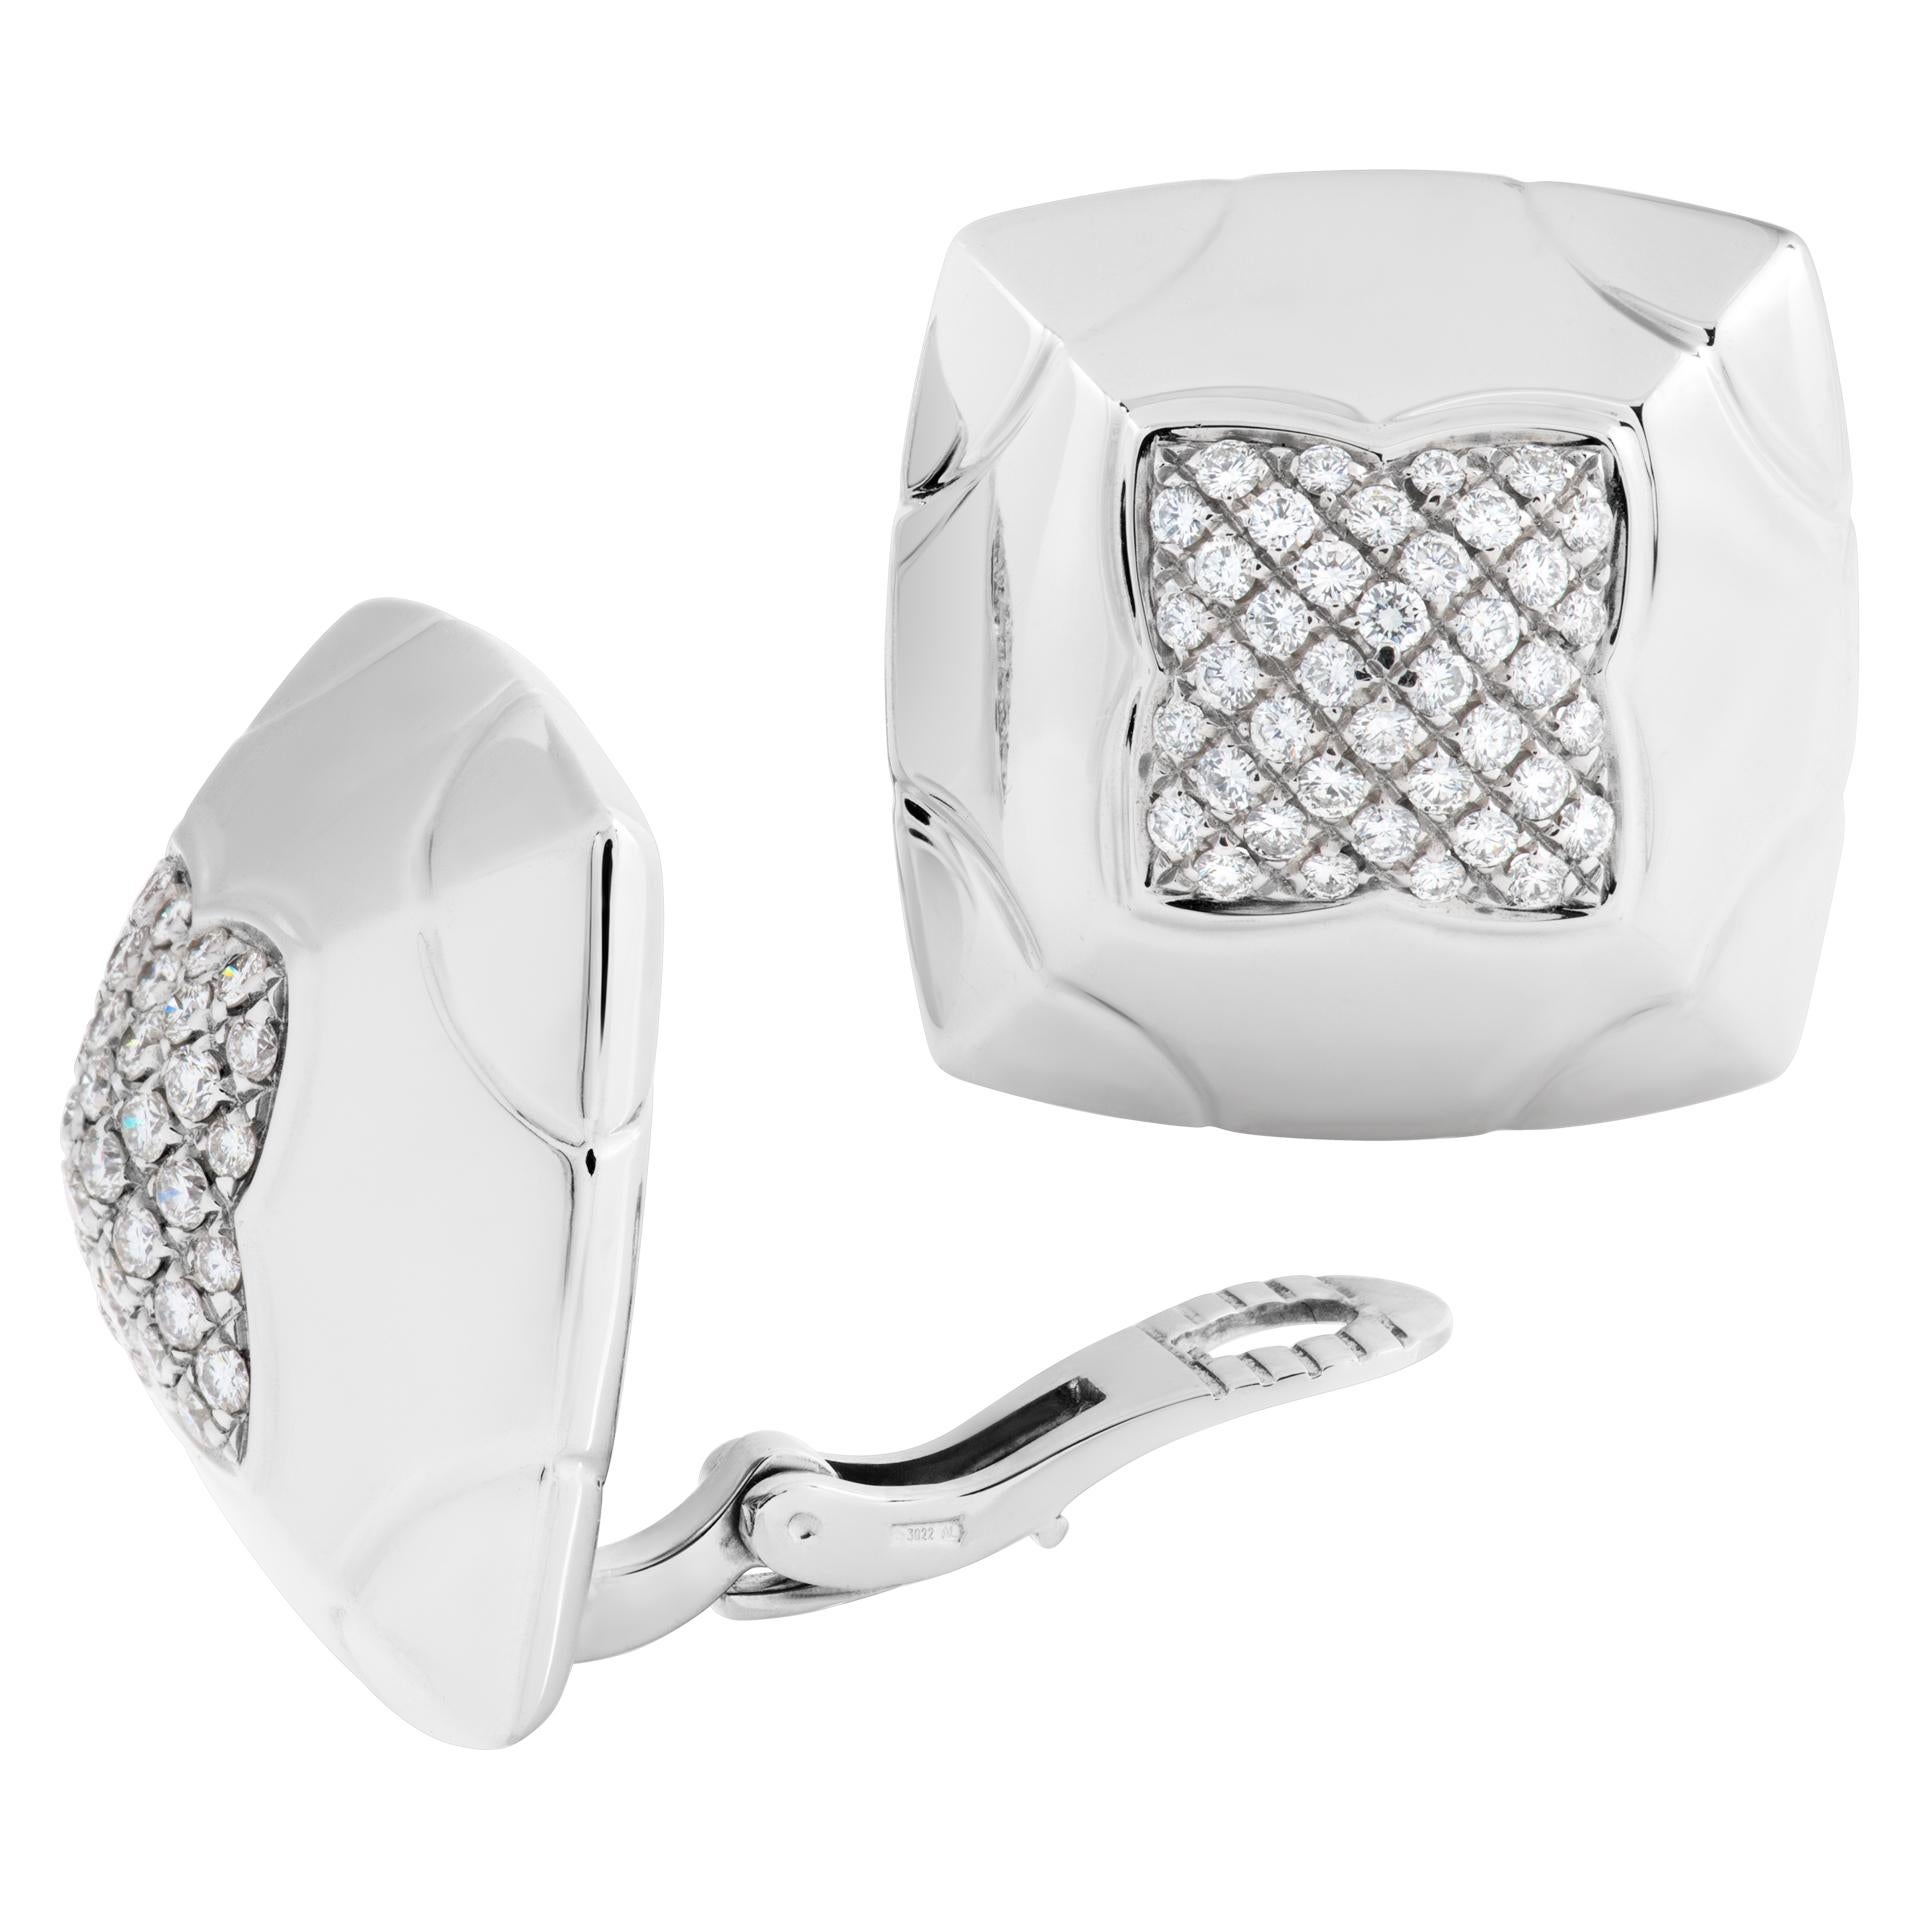 Round Cut Bvlgari Piramide Earrings in 18k White Gold with 1.52 Carats in Pave Diamonds